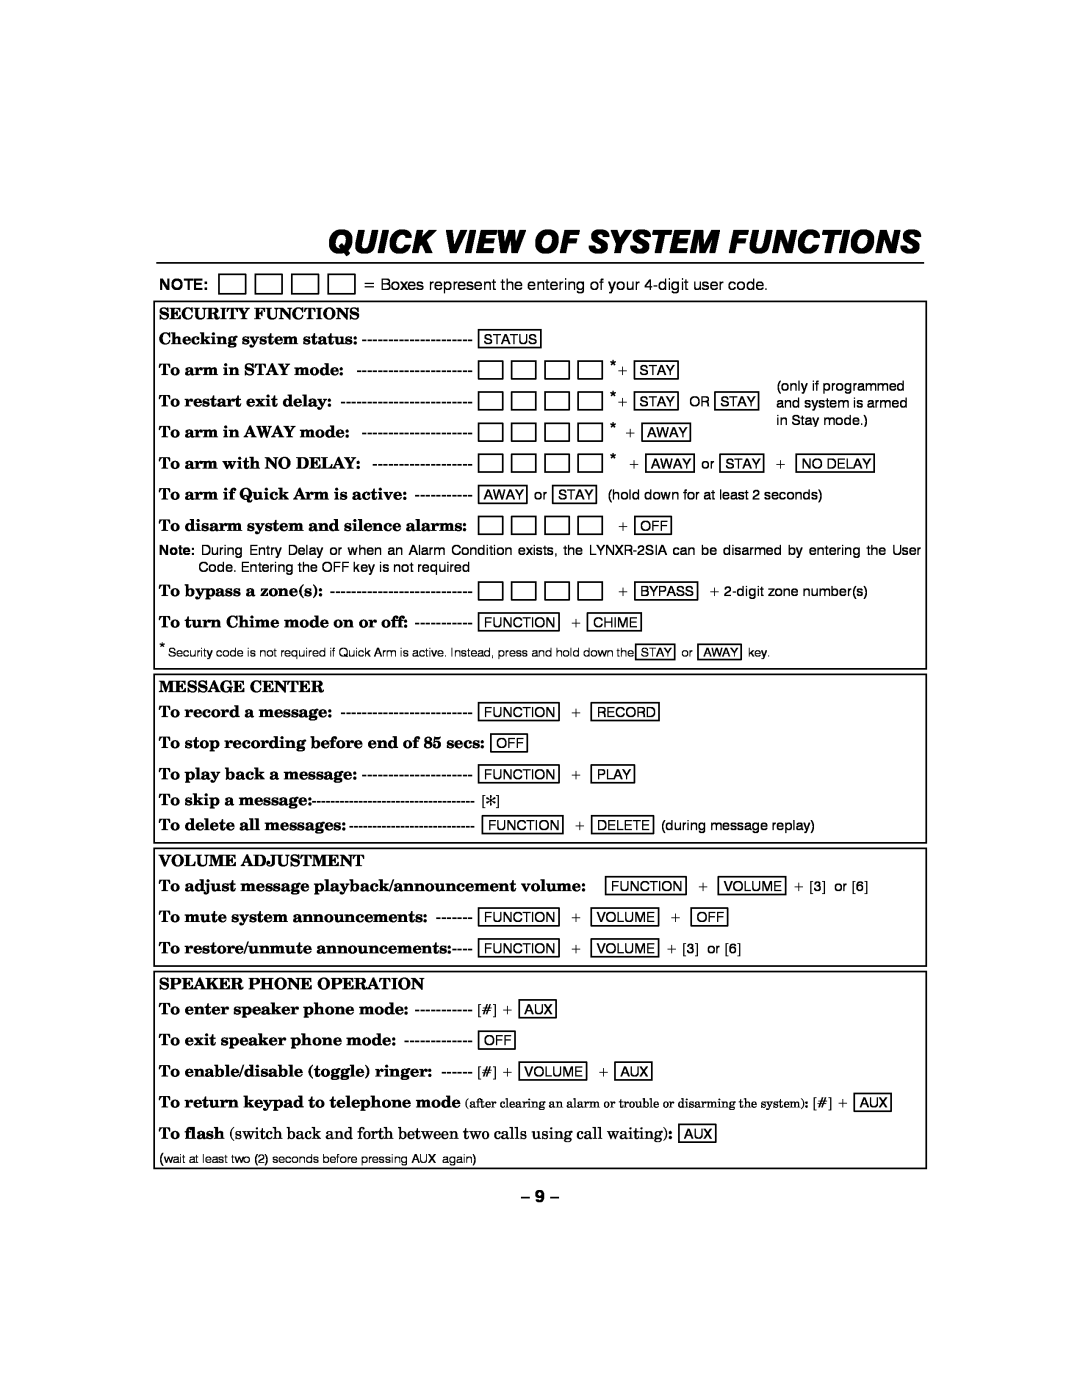 Honeywell LYNXR-2 manual Quick View Of System Functions, Security Functions, Checking system status, To arm in STAY mode 